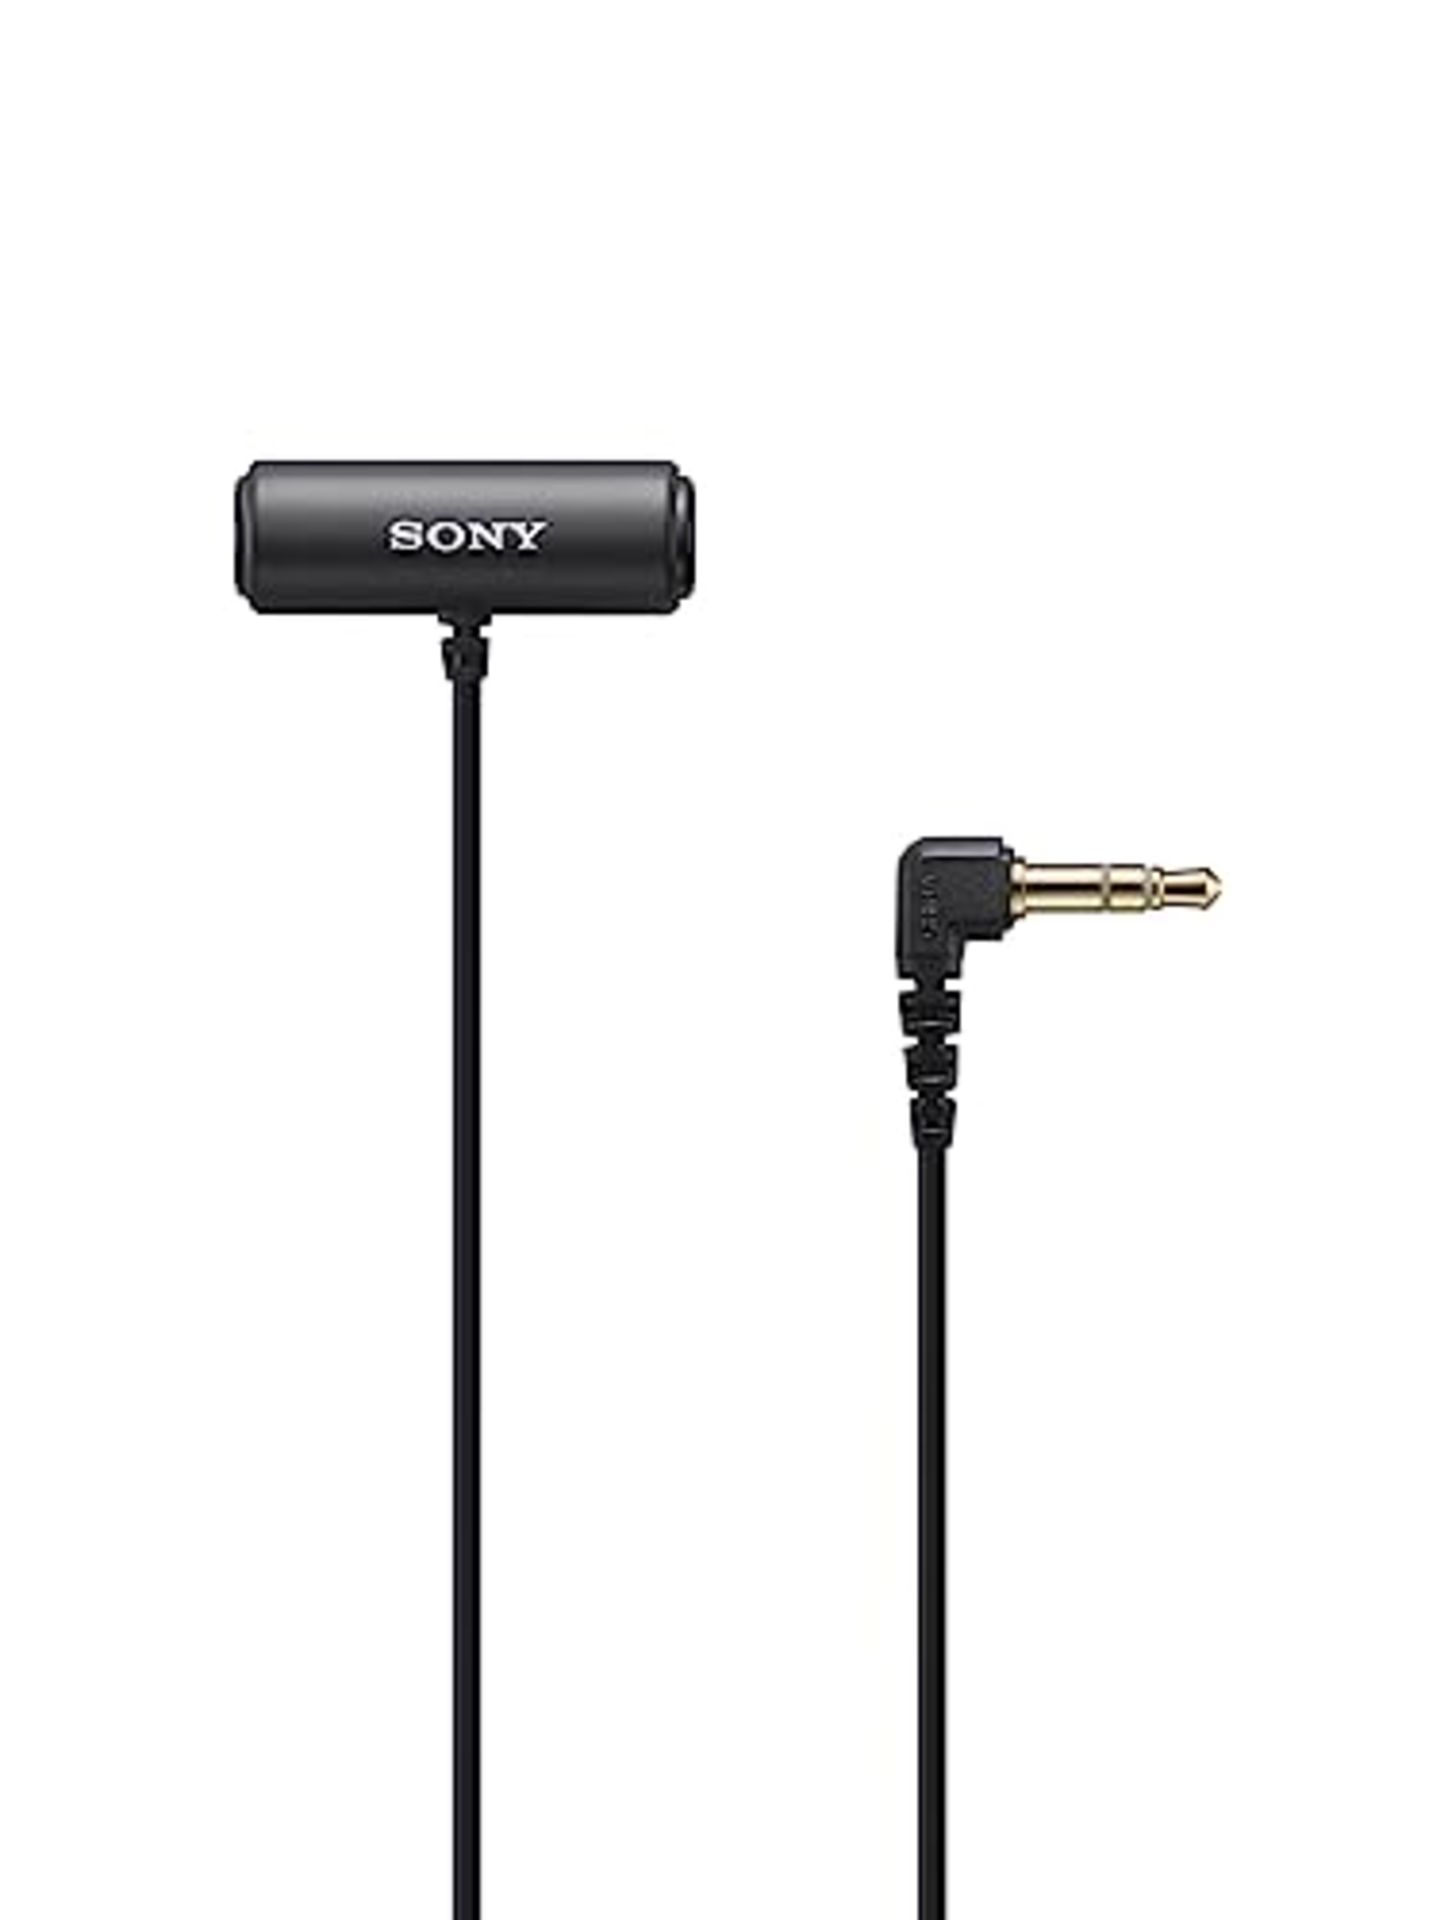 Sony ECM-LV1 - Lavalier Microphone with Stereo Sound Capture, 360° Clothing Clip, for - Image 4 of 6